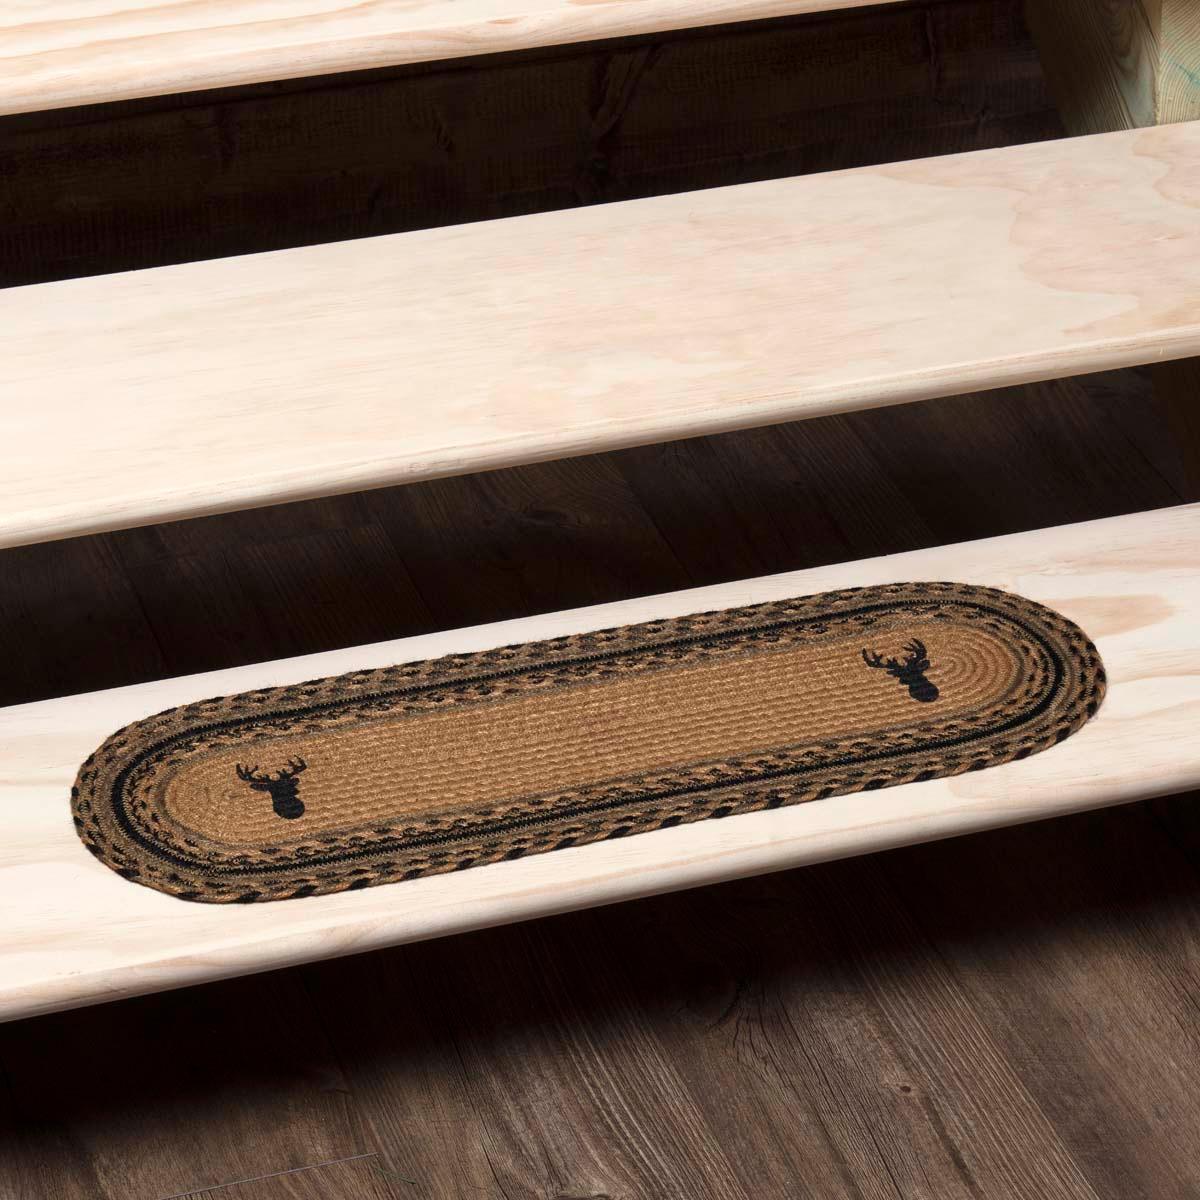 Trophy Mount Jute Stair Tread Oval Latex 8.5x27 VHC Brands - The Fox Decor